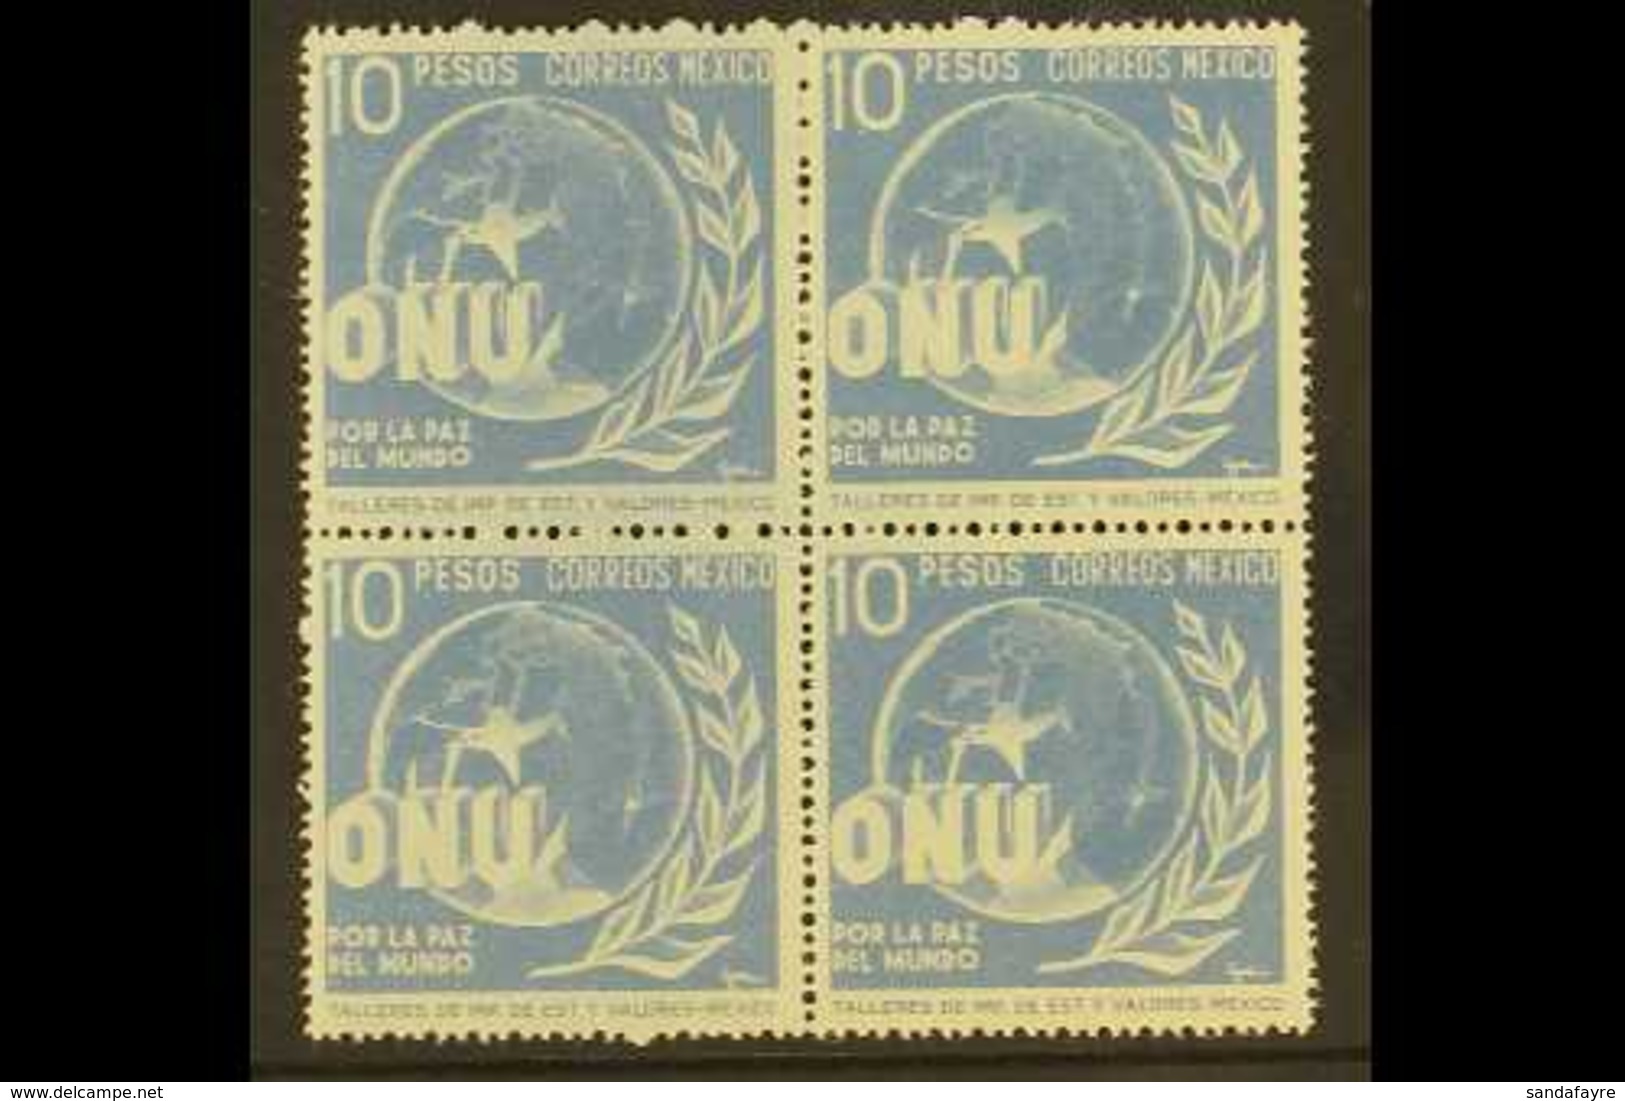 1946 10 Peso Ultramarine "United Nations", SG 771, Scott 818, Never Hinged Mint Block Of 4 (4 Stamps) For More Images, P - Messico